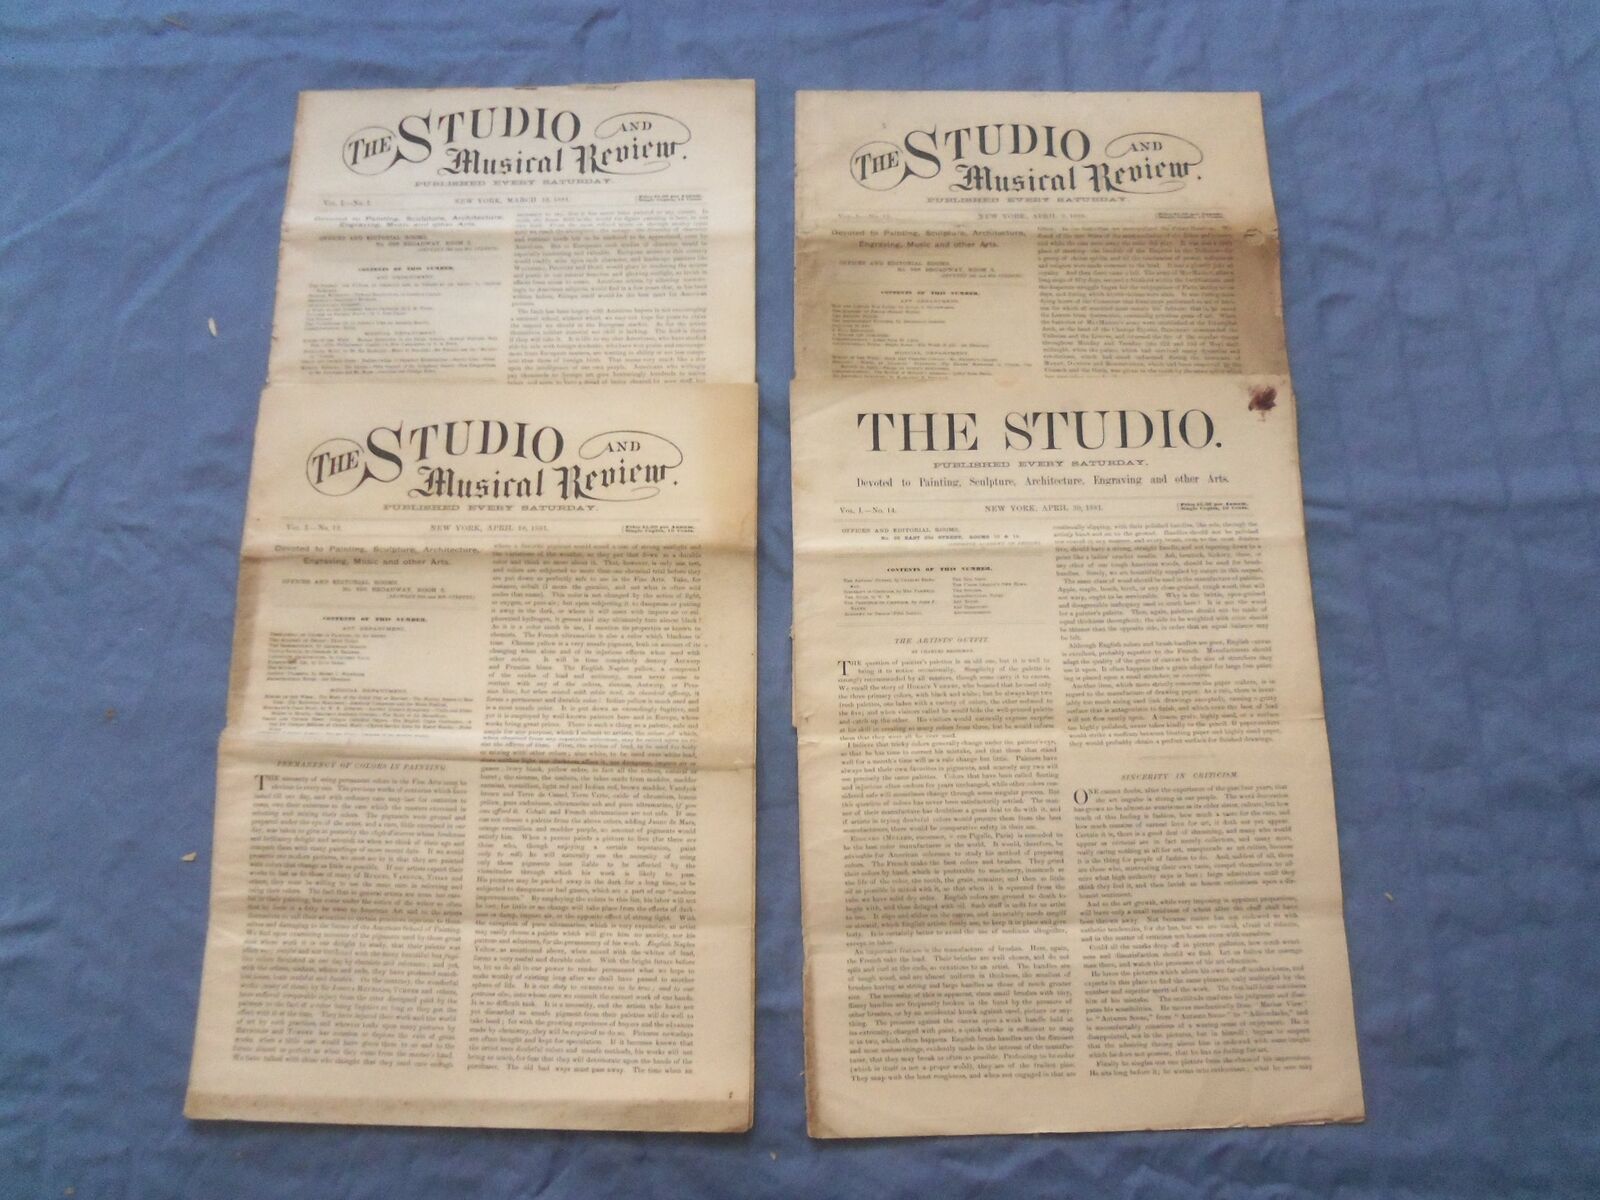 1881 THE STUDIO AND MUSICAL REVIEW NEWSPAPER - LOT OF 4 - NP 8416